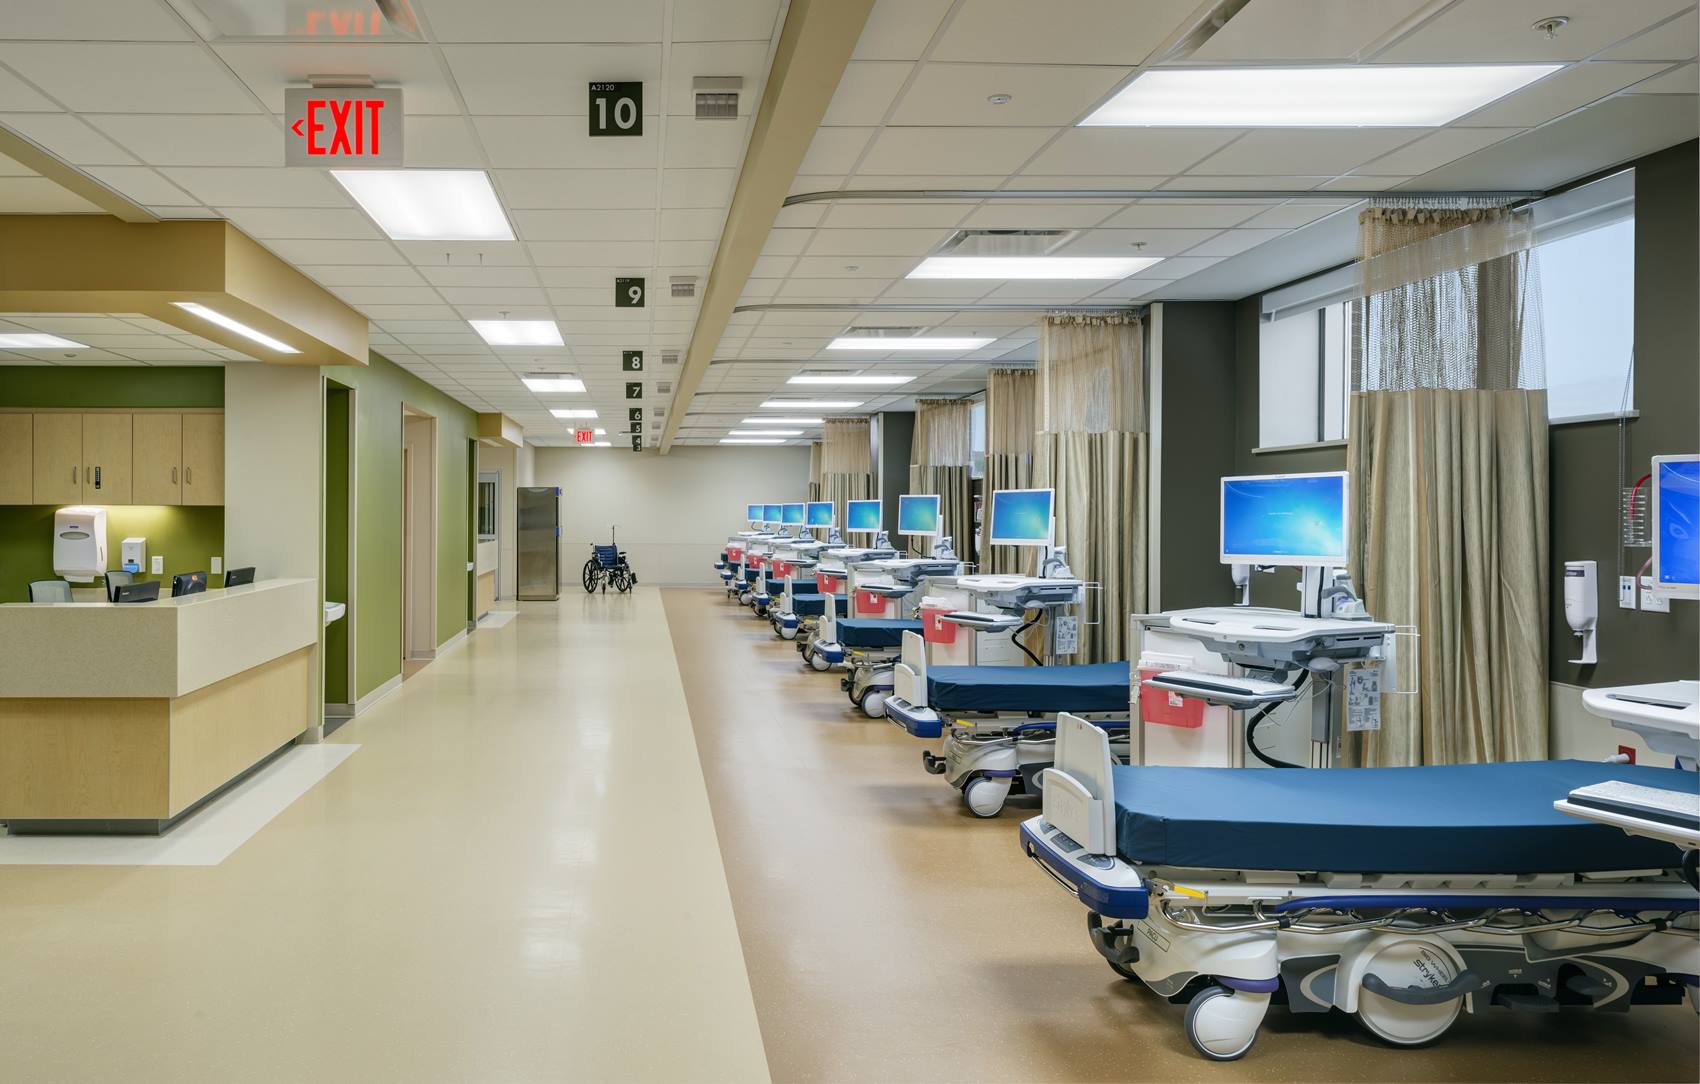 Patient room at MaineGeneral Medical Center